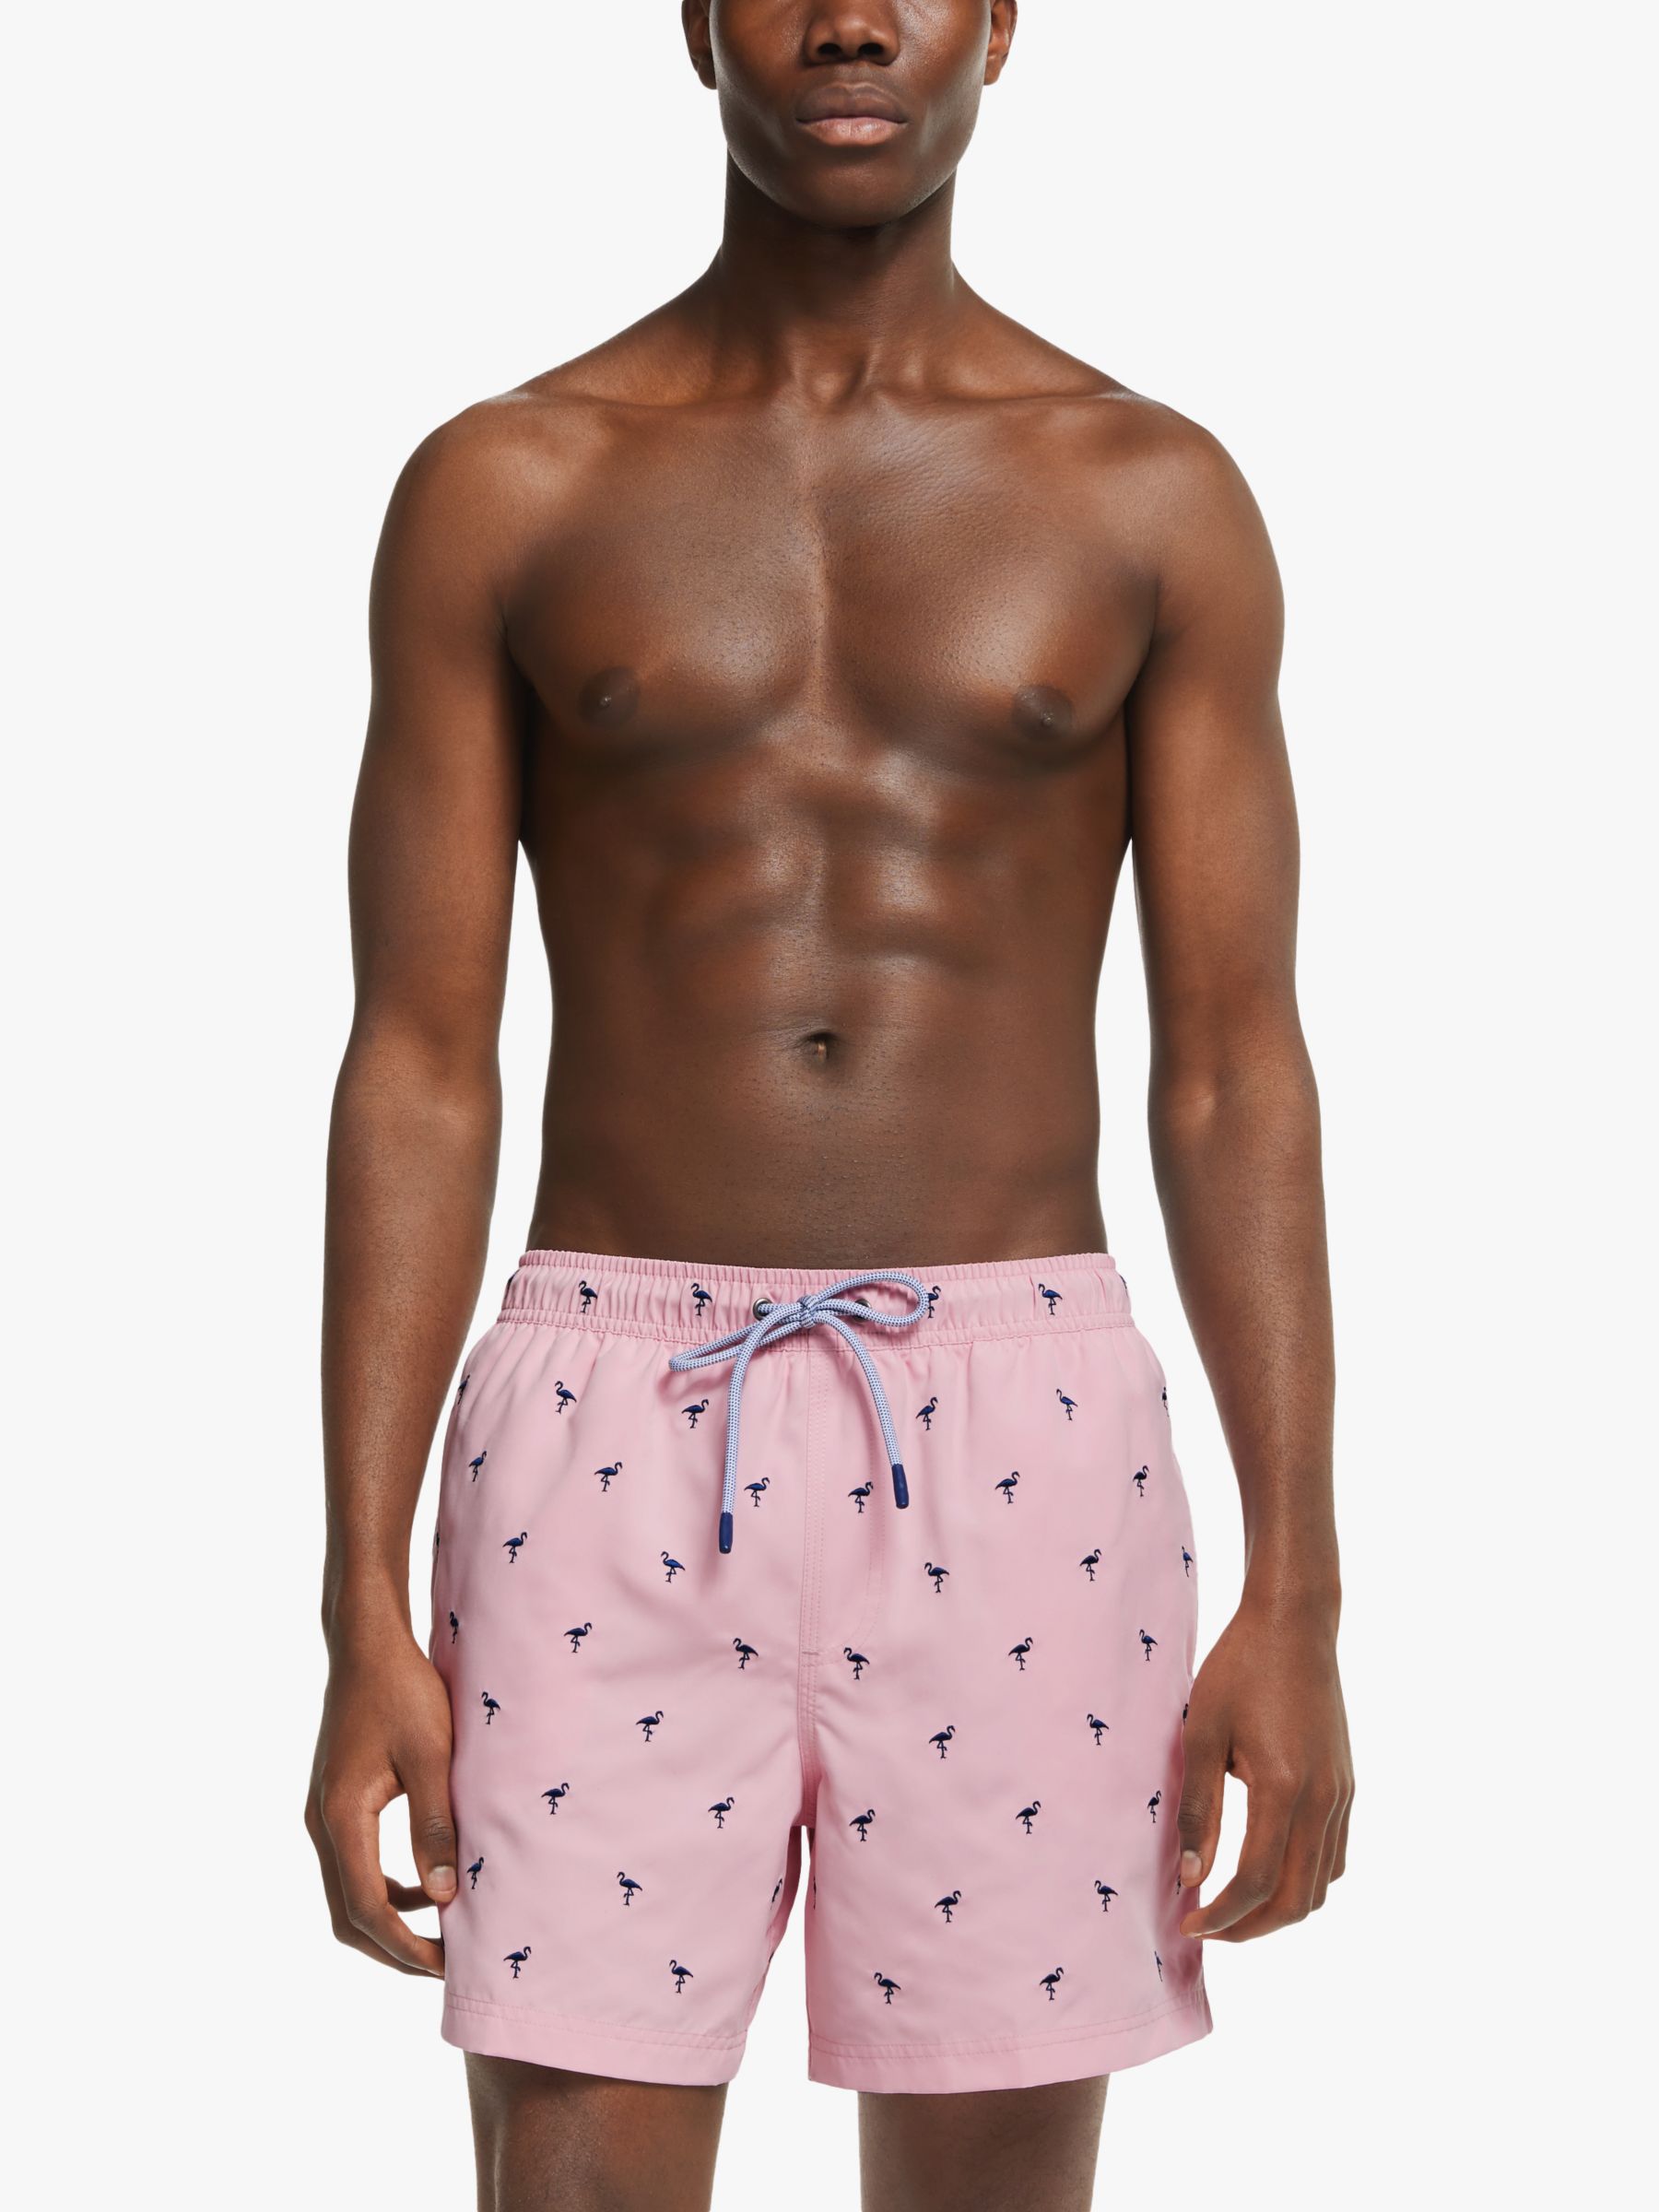 John Lewis & Partners Recycled Poly Flamingo Embroidery Swim Shorts, Pink